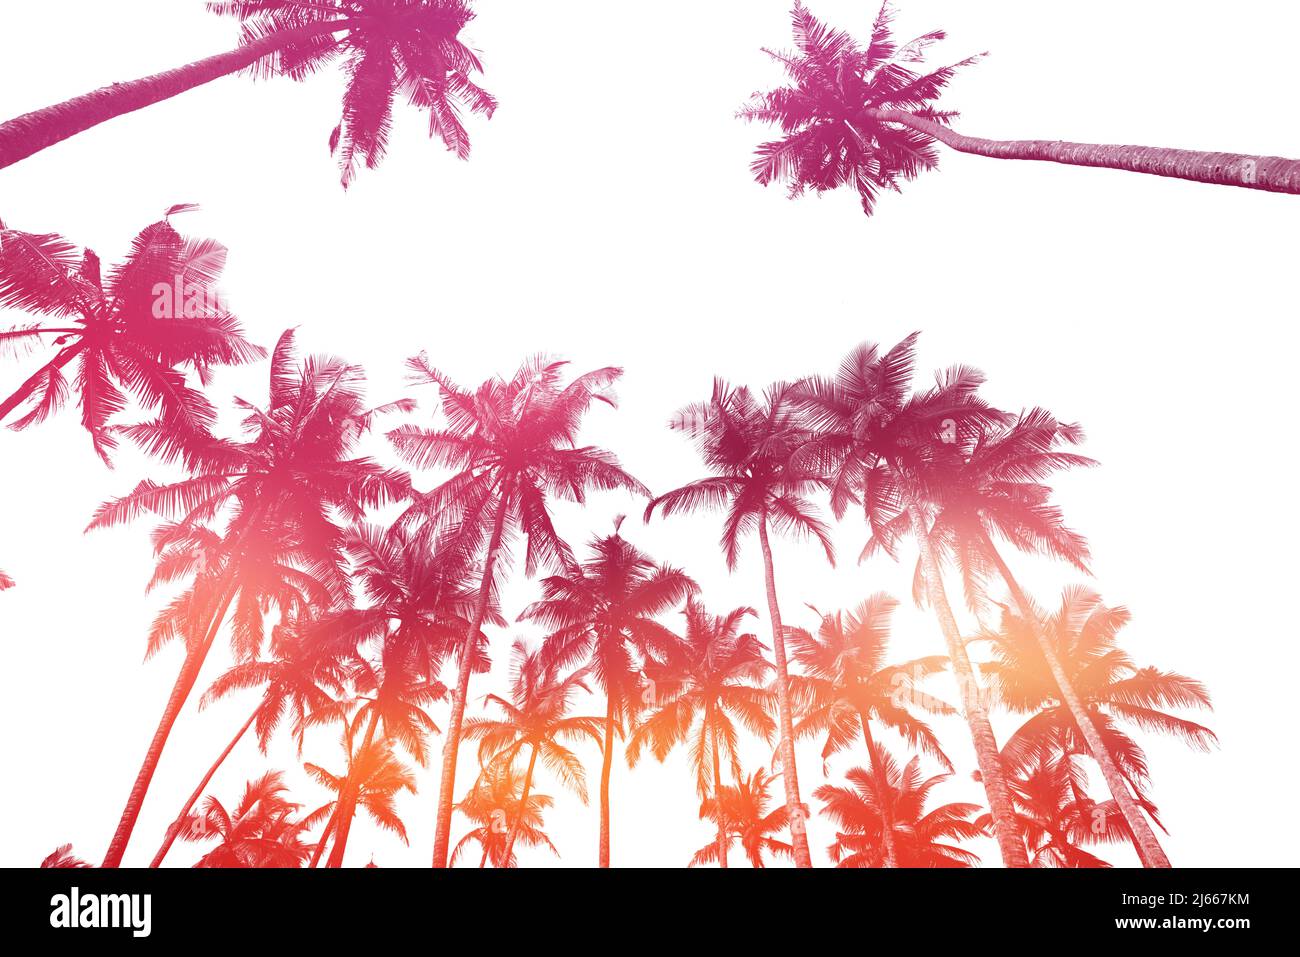 Tropical Coconut Palm Trees Silhouettes Isolated On White Background